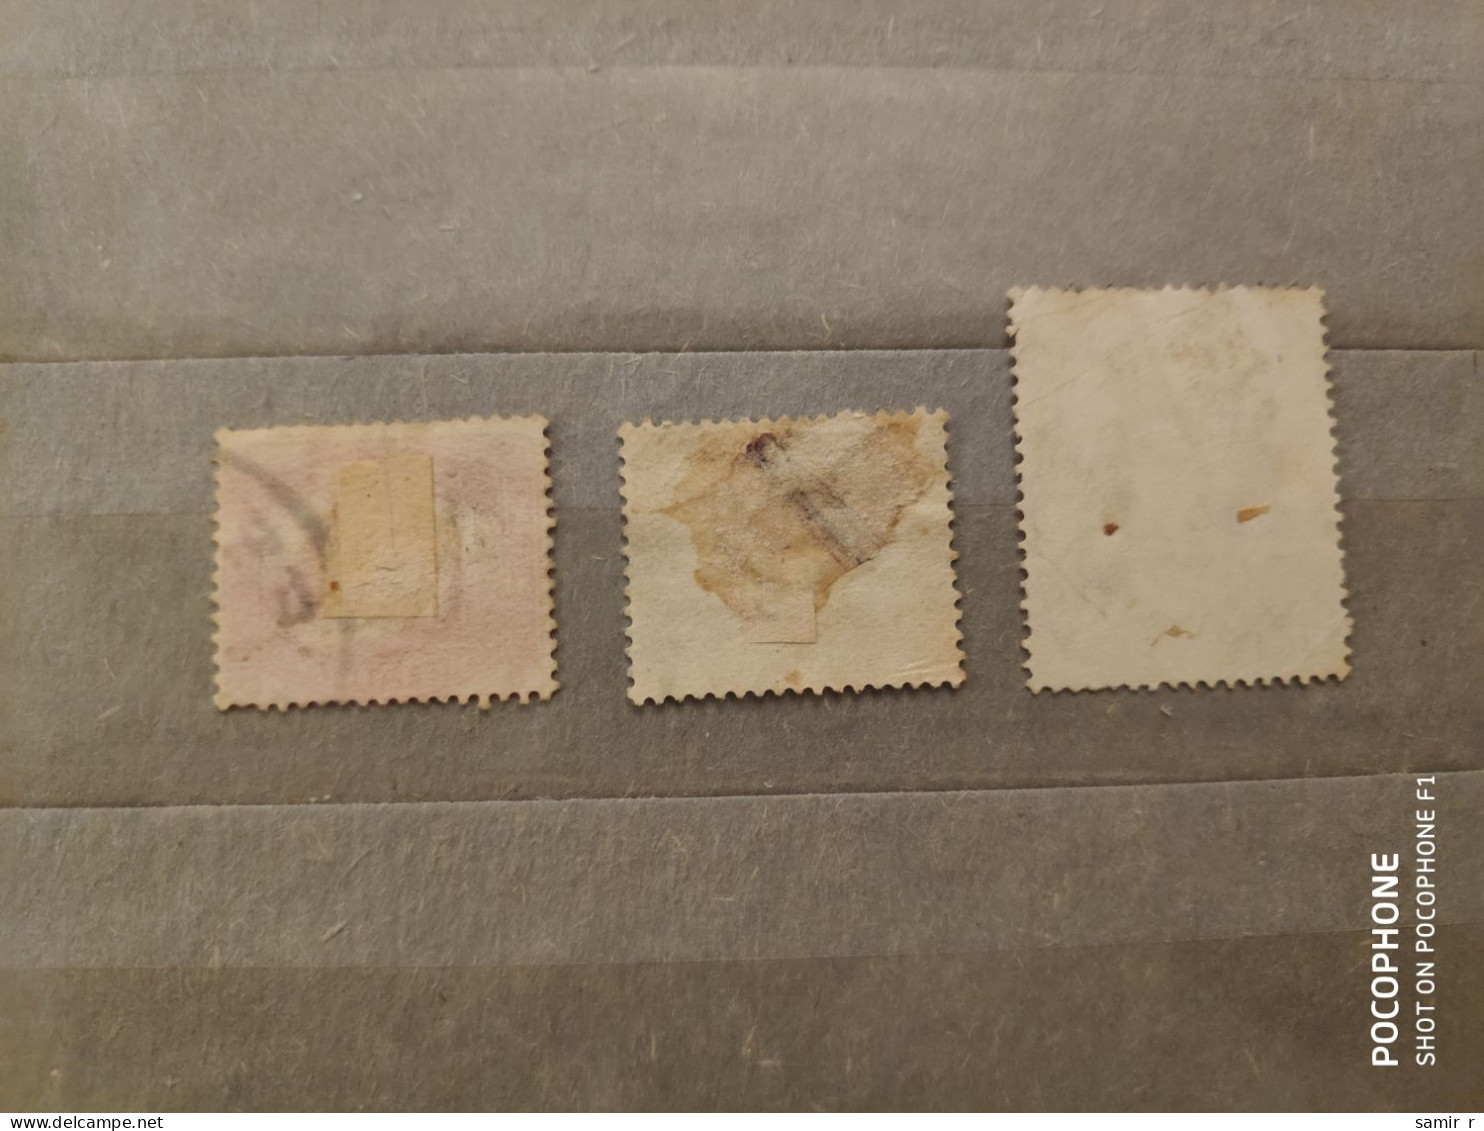 Egypt	Pyramids (F95) - Used Stamps